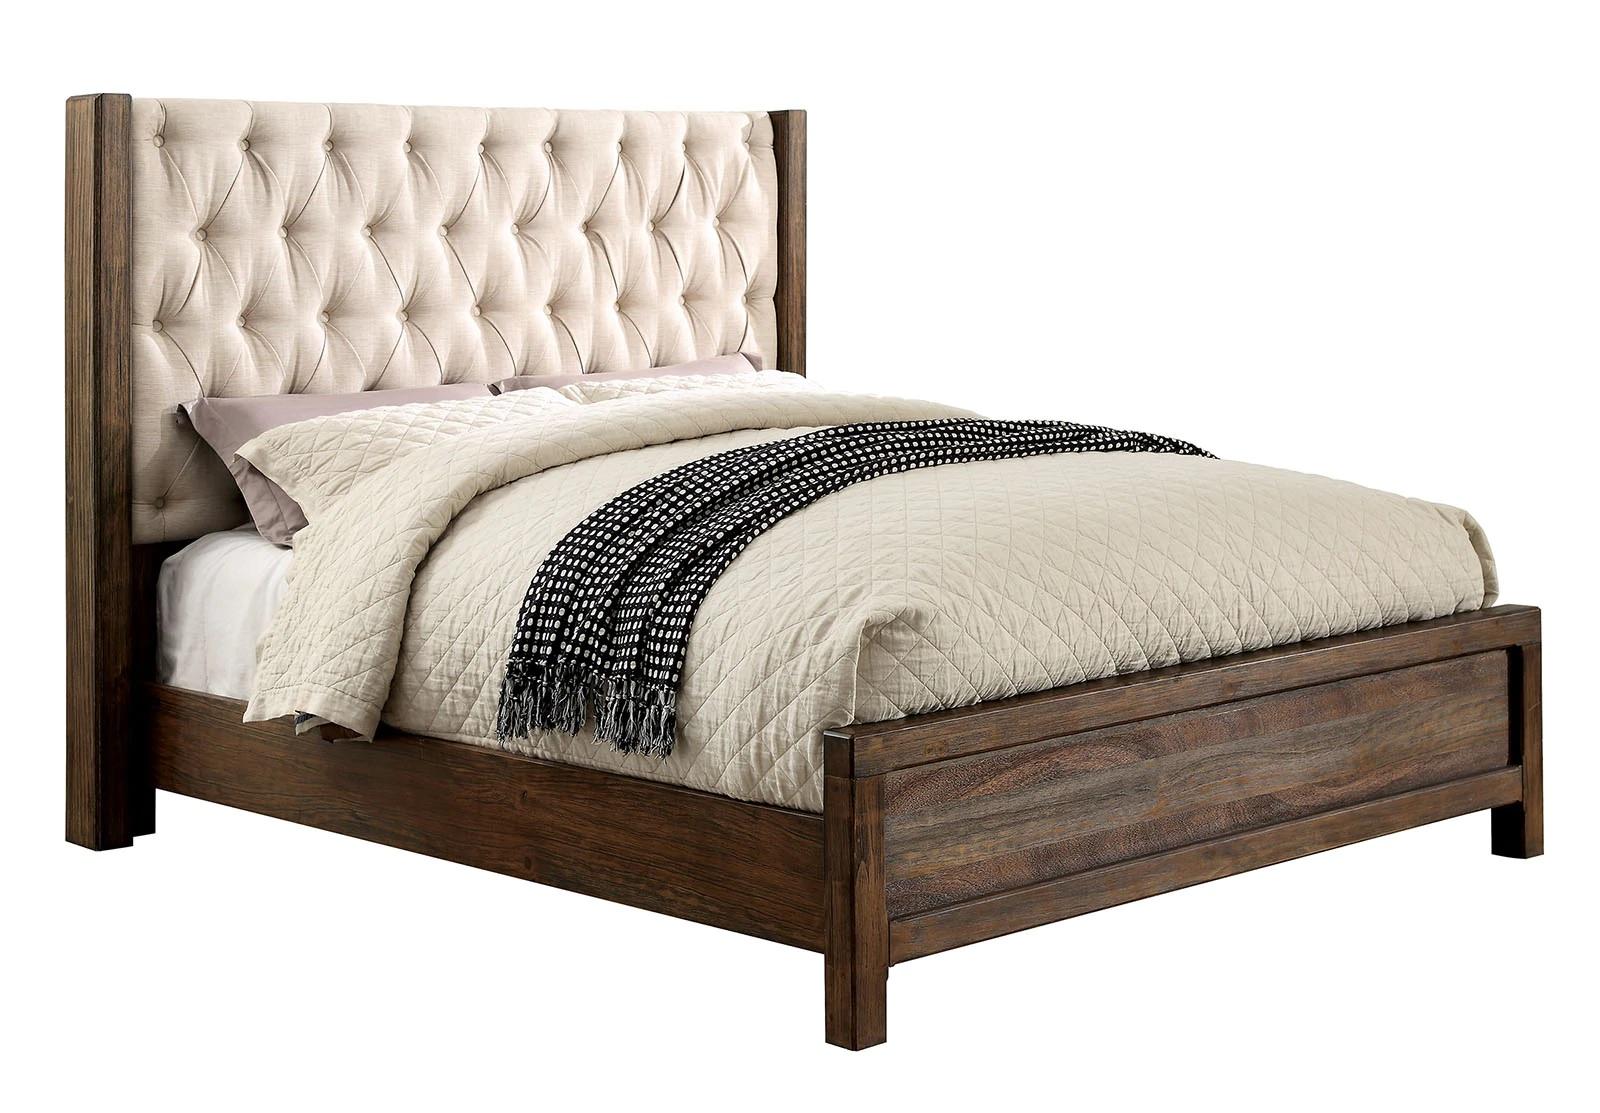 Rustic Panel Bed CM7577-CK Hutchinson CM7577-CK in Natural 